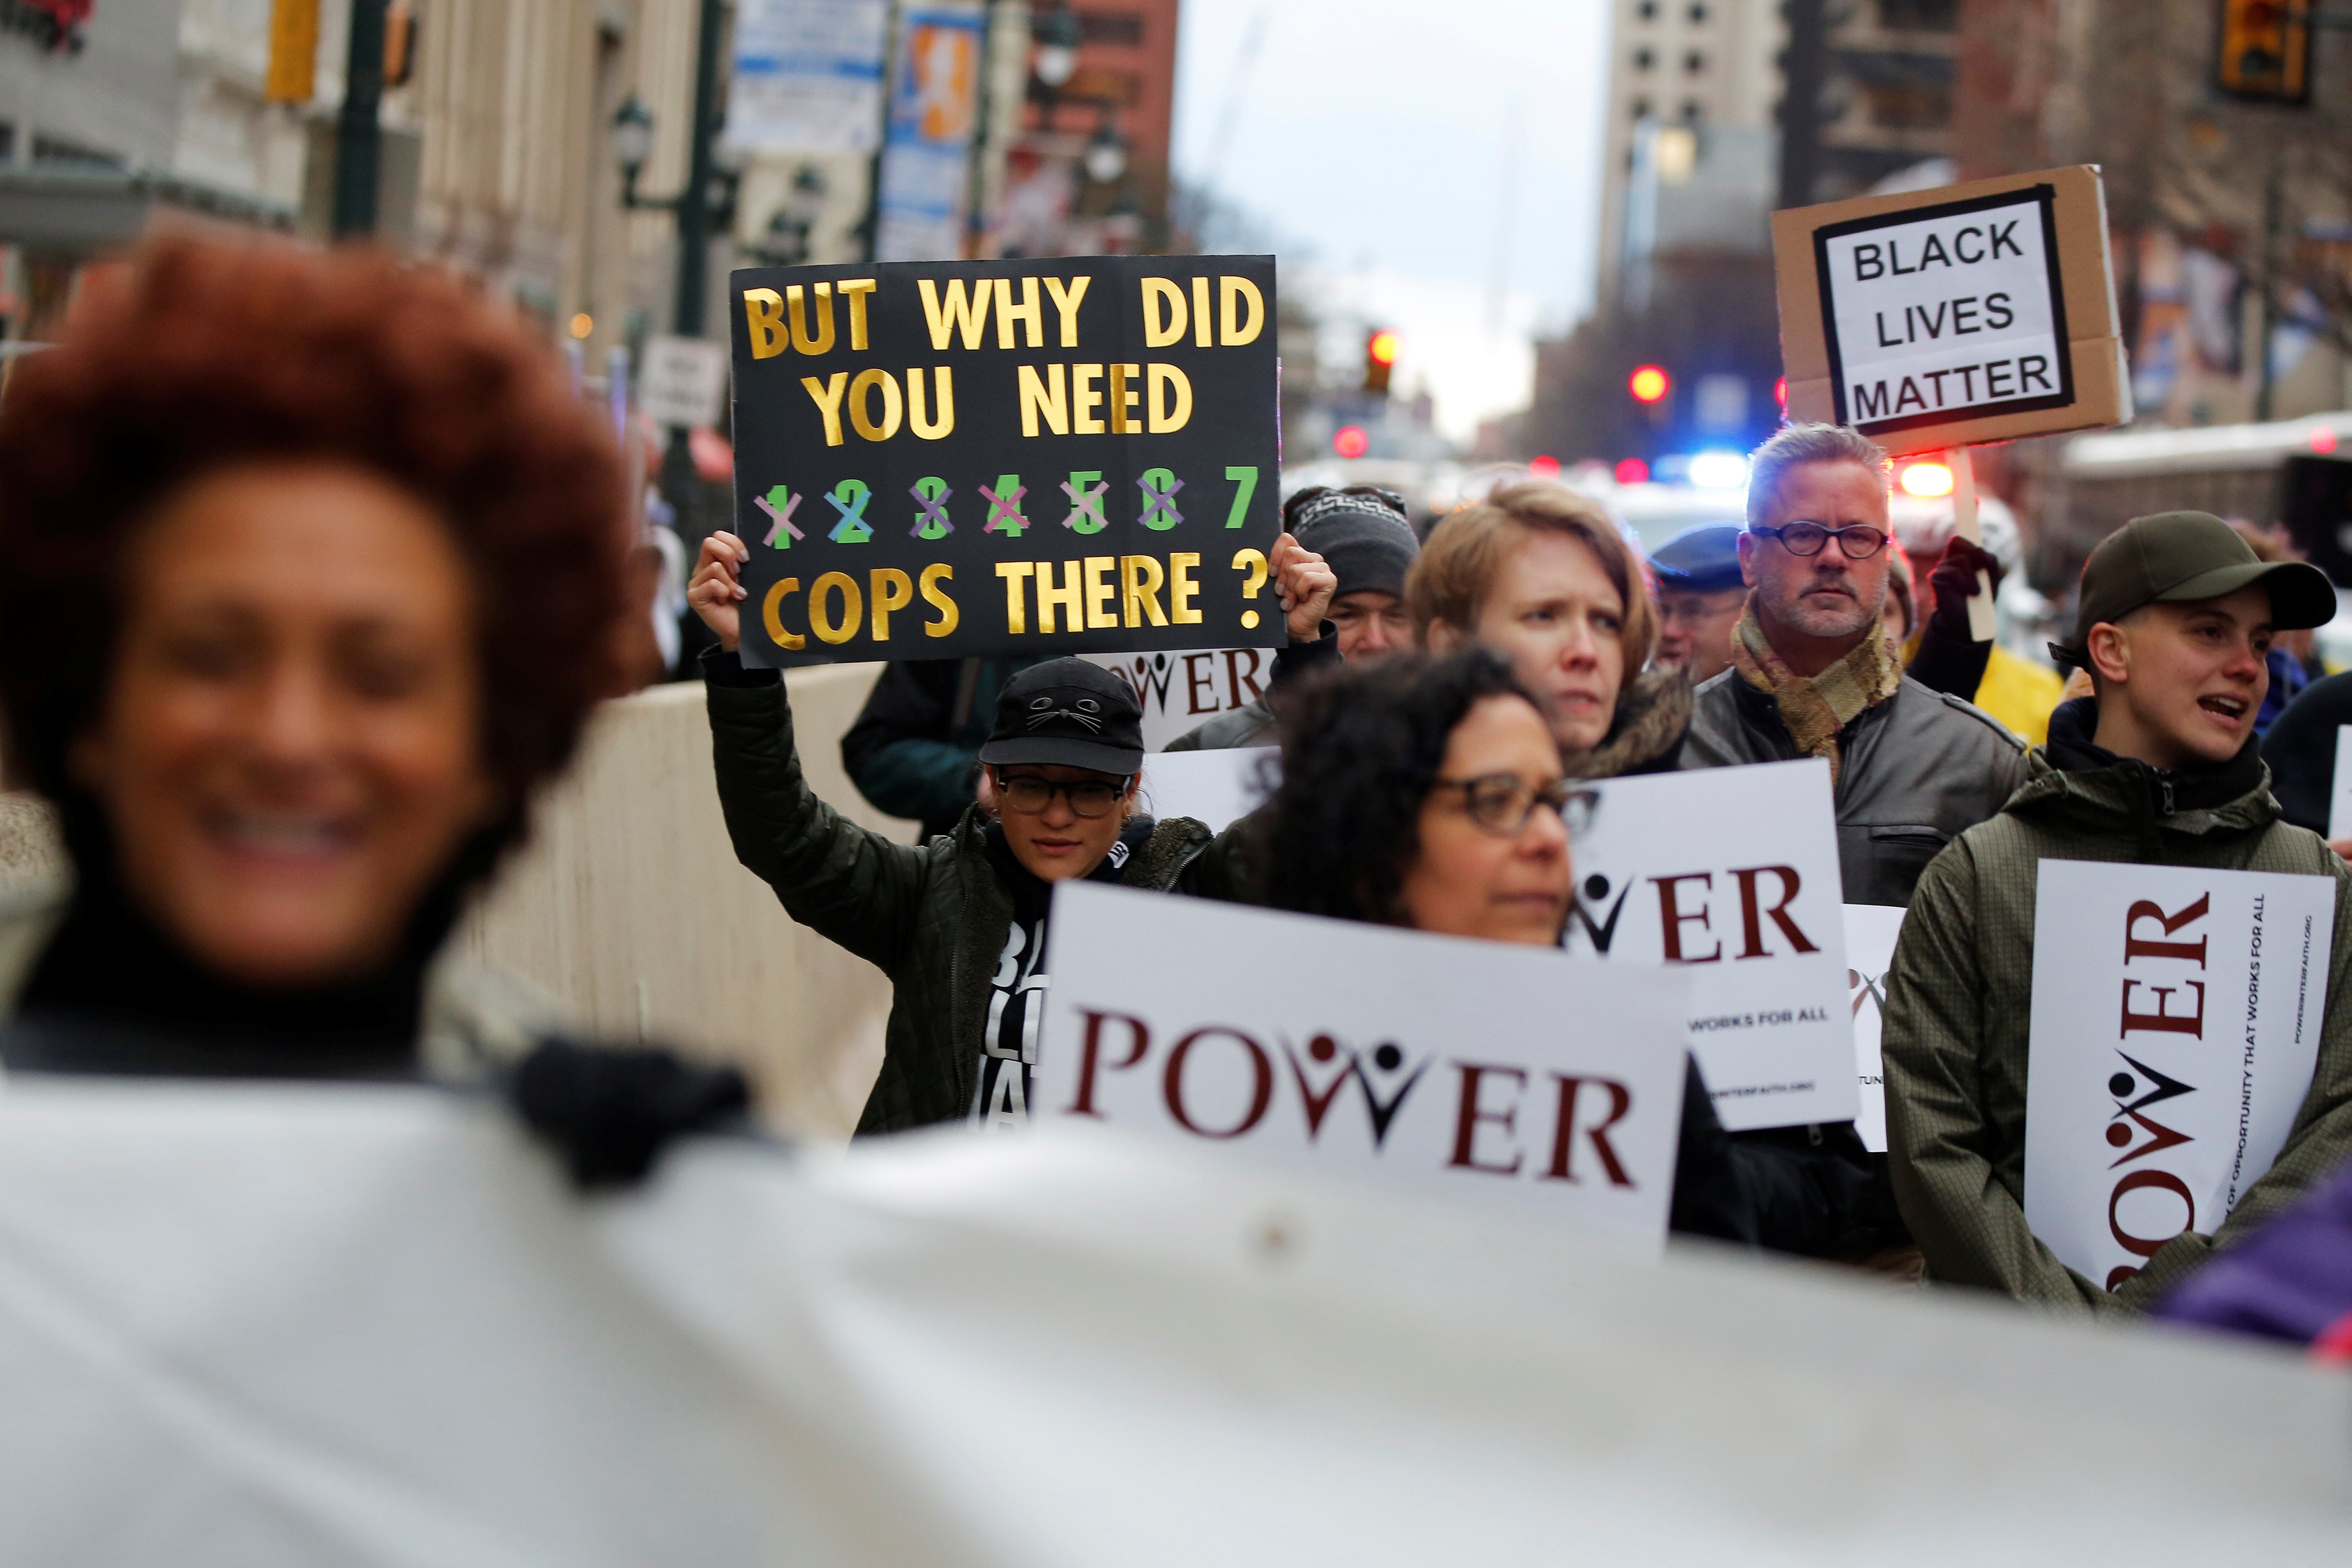 Protesters march down Market Street in Philadelphia on April 19, a week after two black men were arrested at a Starbucks coffee shop in Philadelphia, Pennsylvania. The company has been forced into damage-limitation mode after the arrests. Photo: Reuters